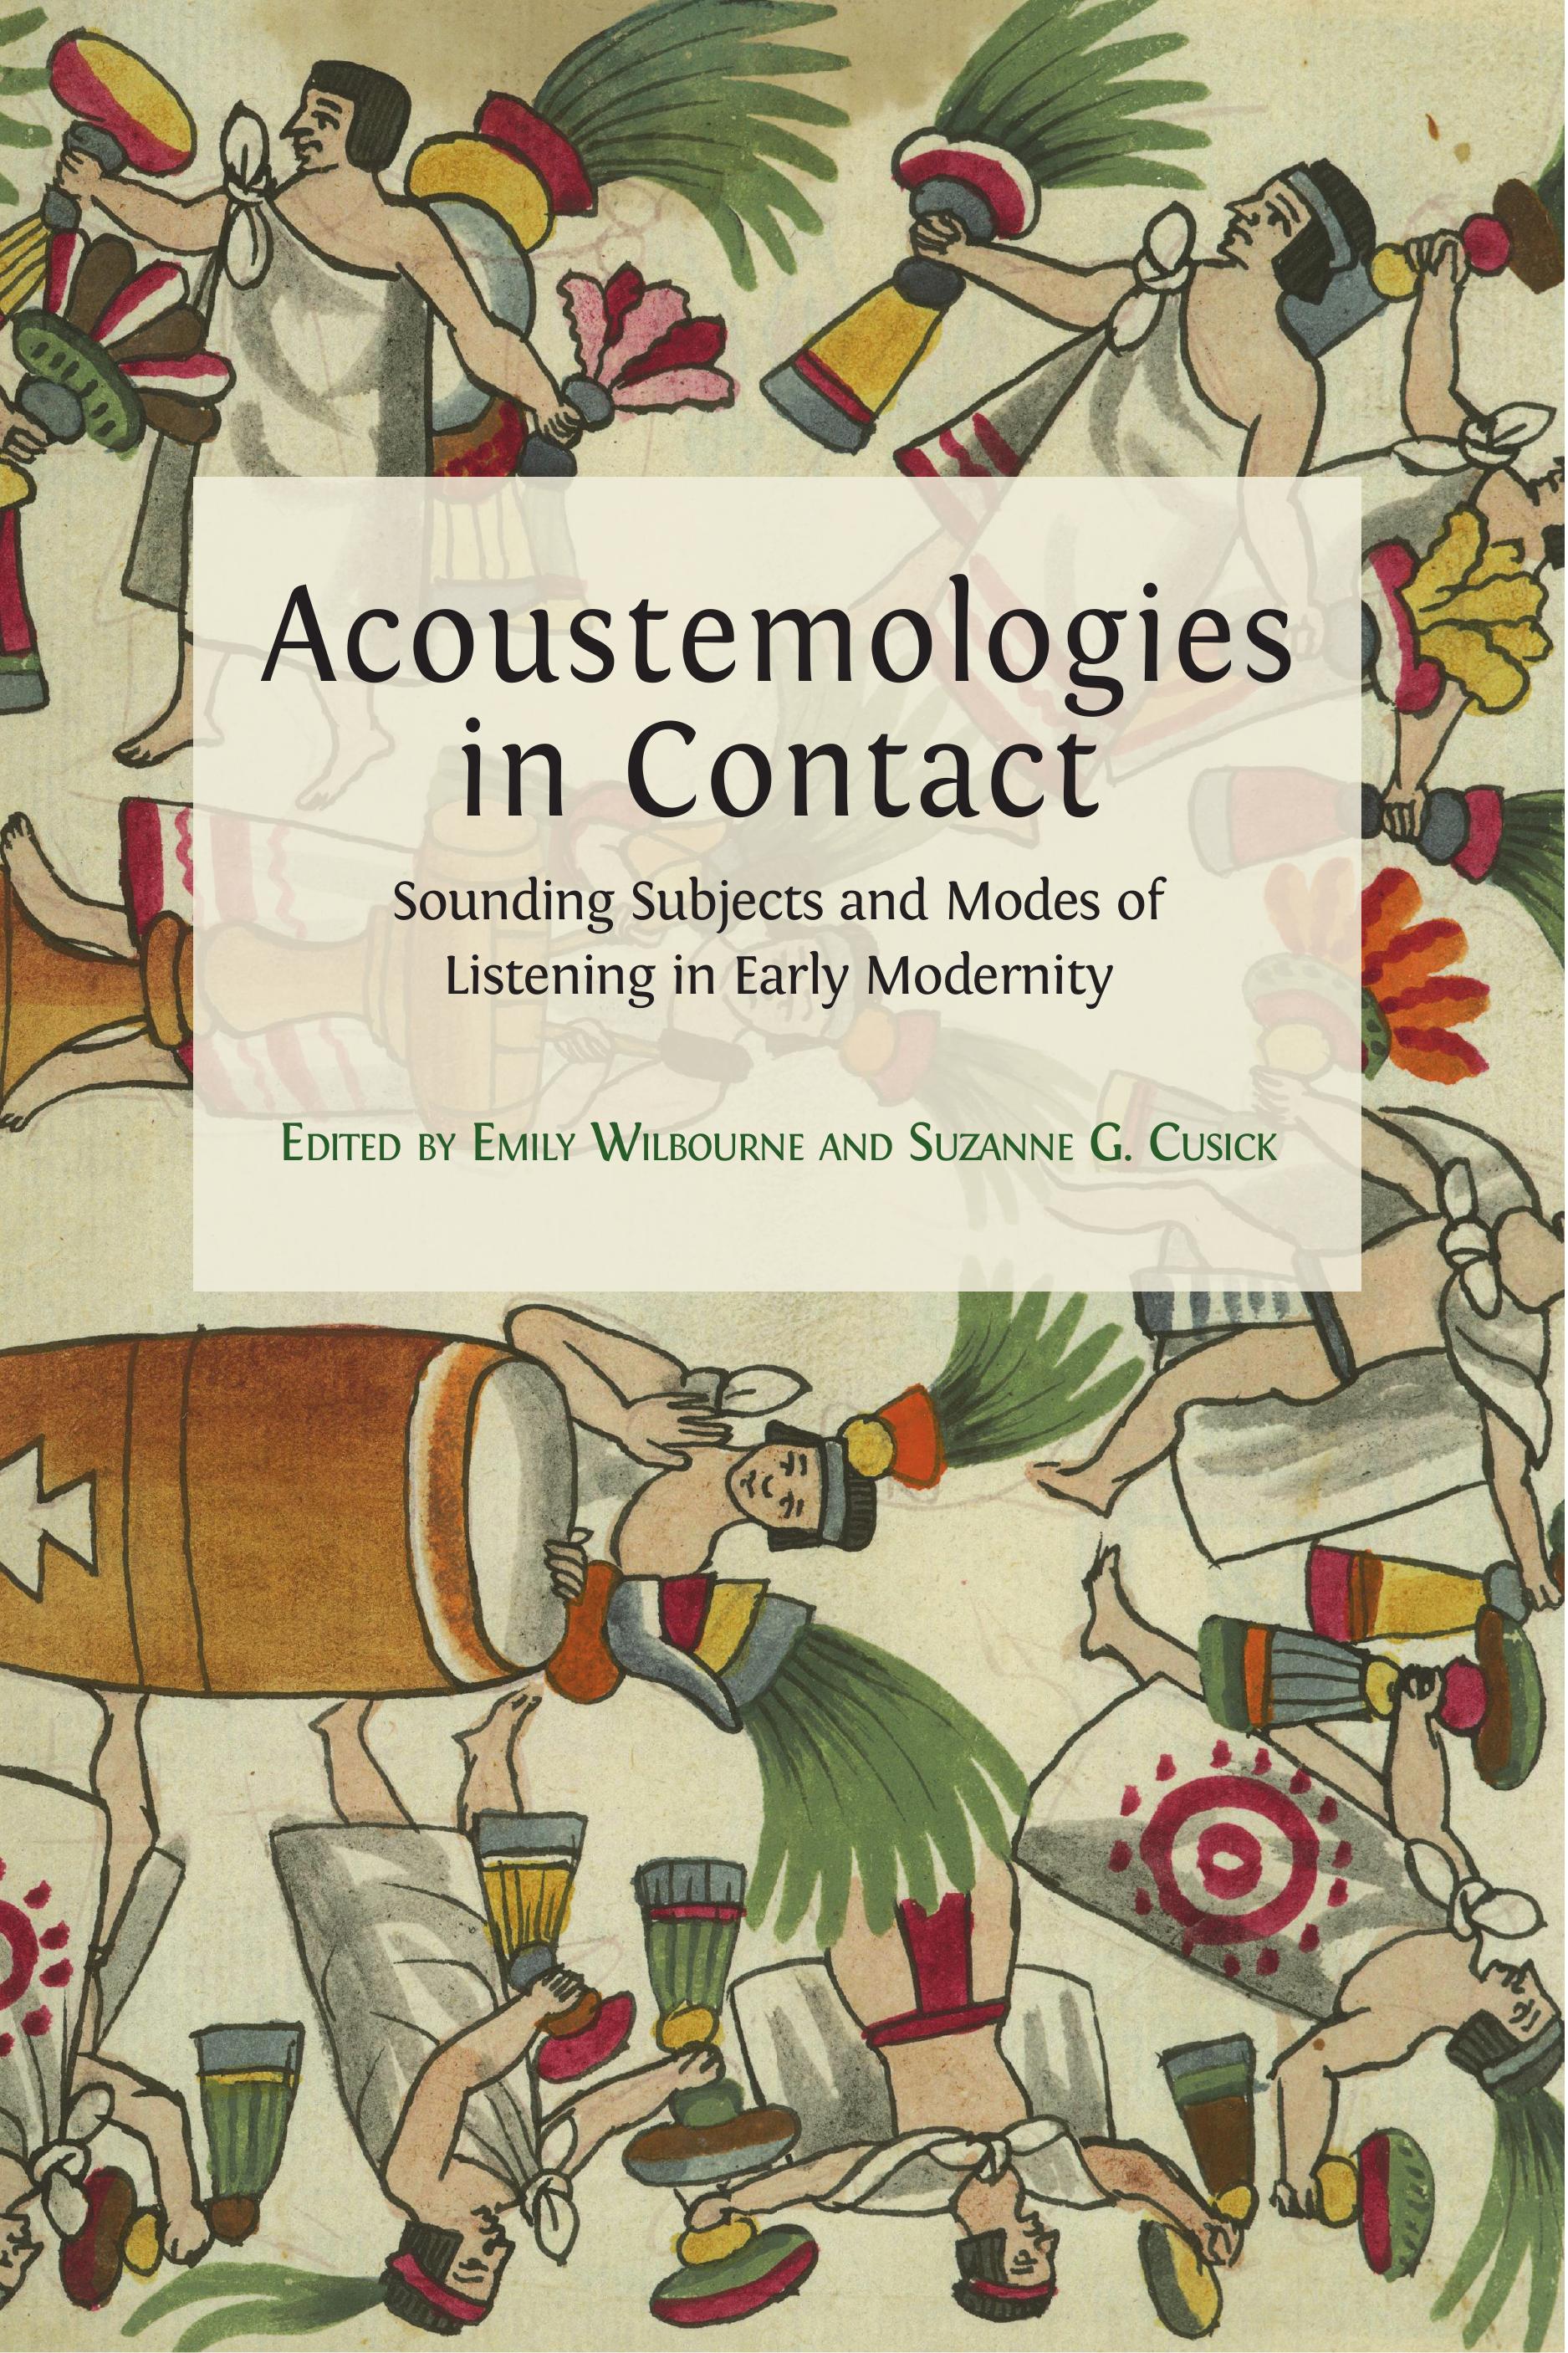 Acoustemologies in Contact: Sounding Subjects and Modes of Listening in Early Modernity